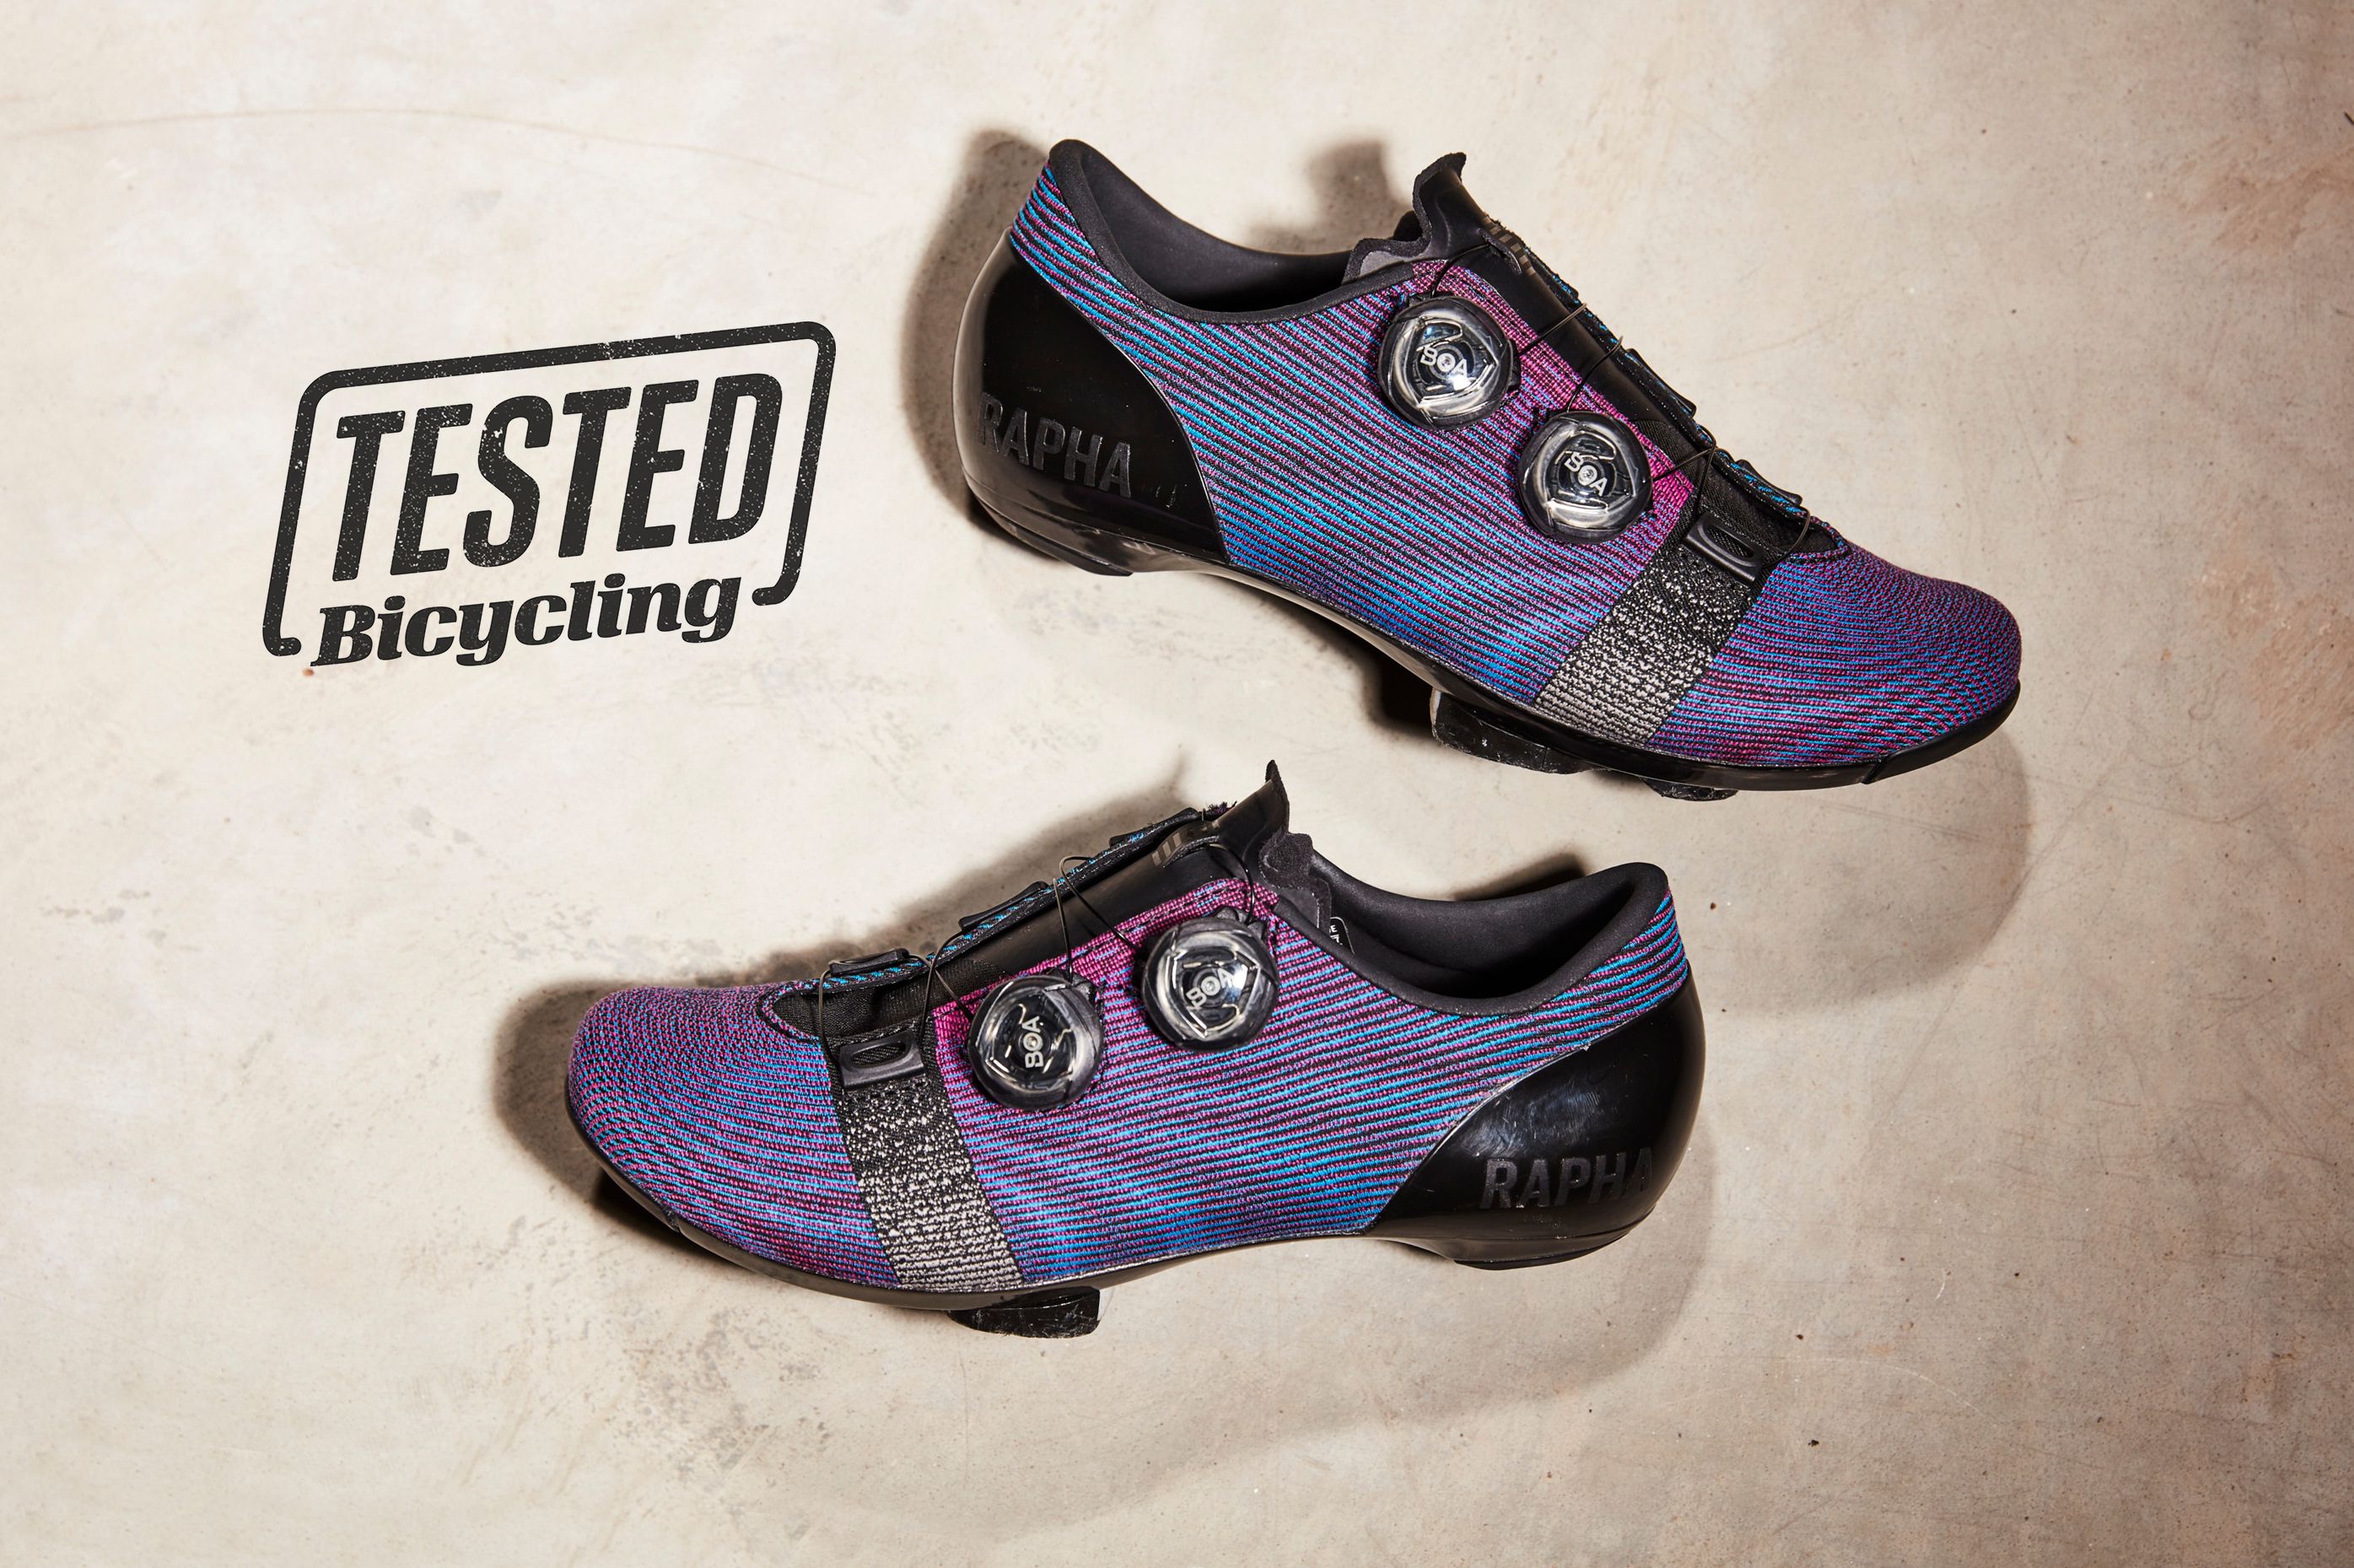 rapha shoes review